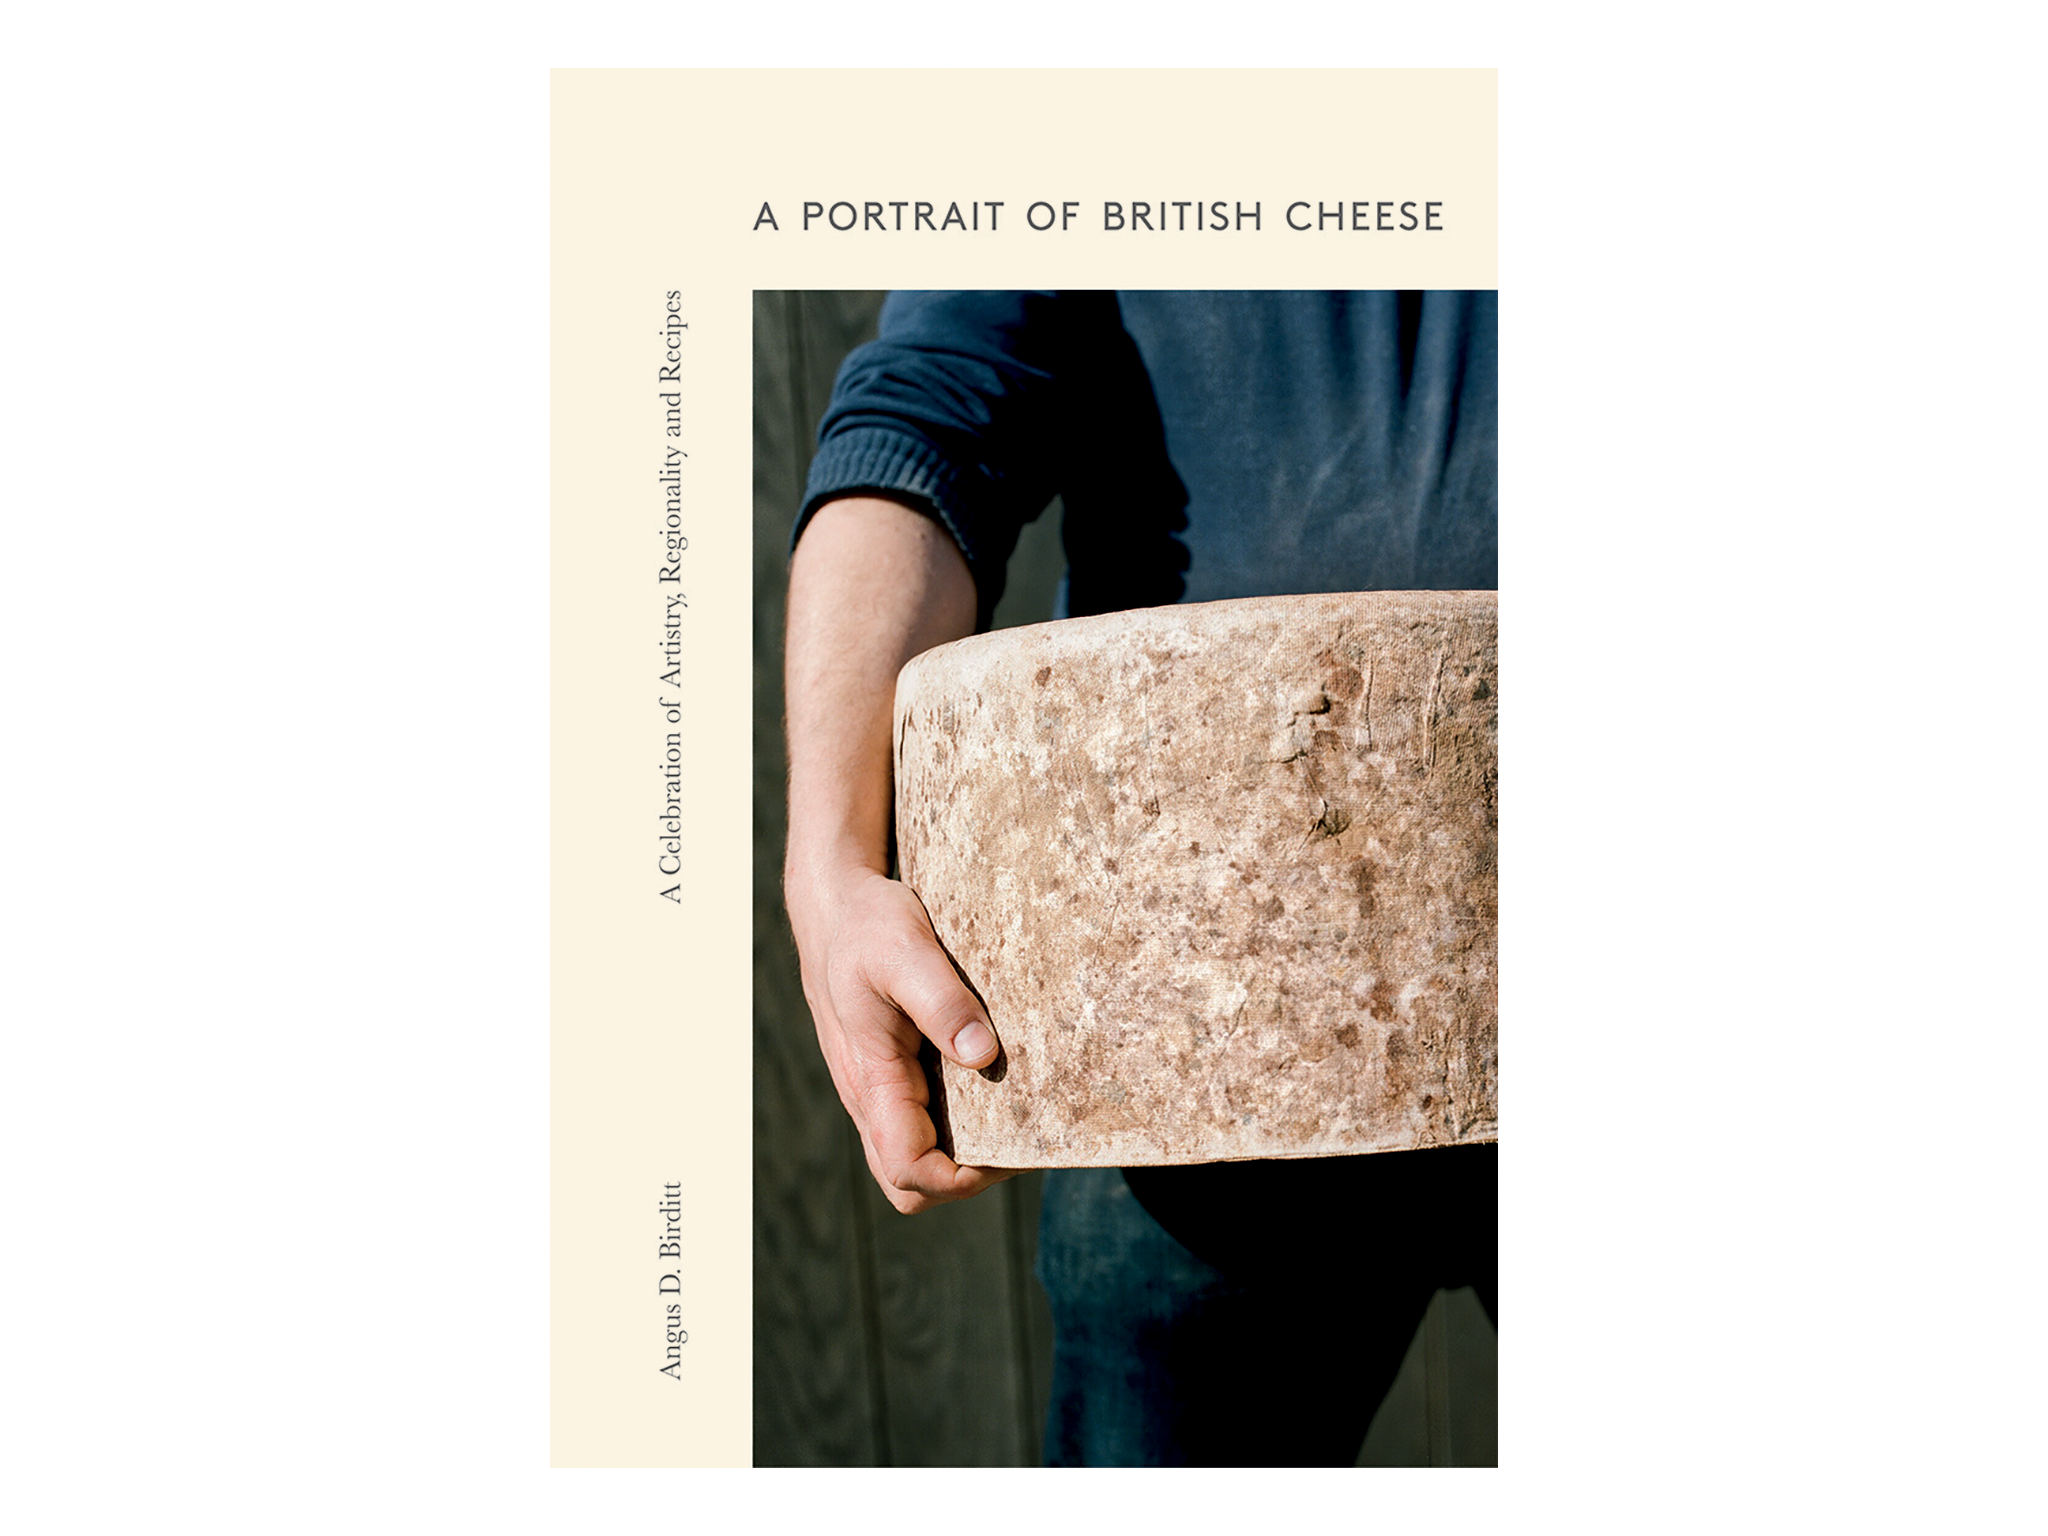 ‘A Portrait of British Cheese’ by Angus D. Birditt, published by Quadrille